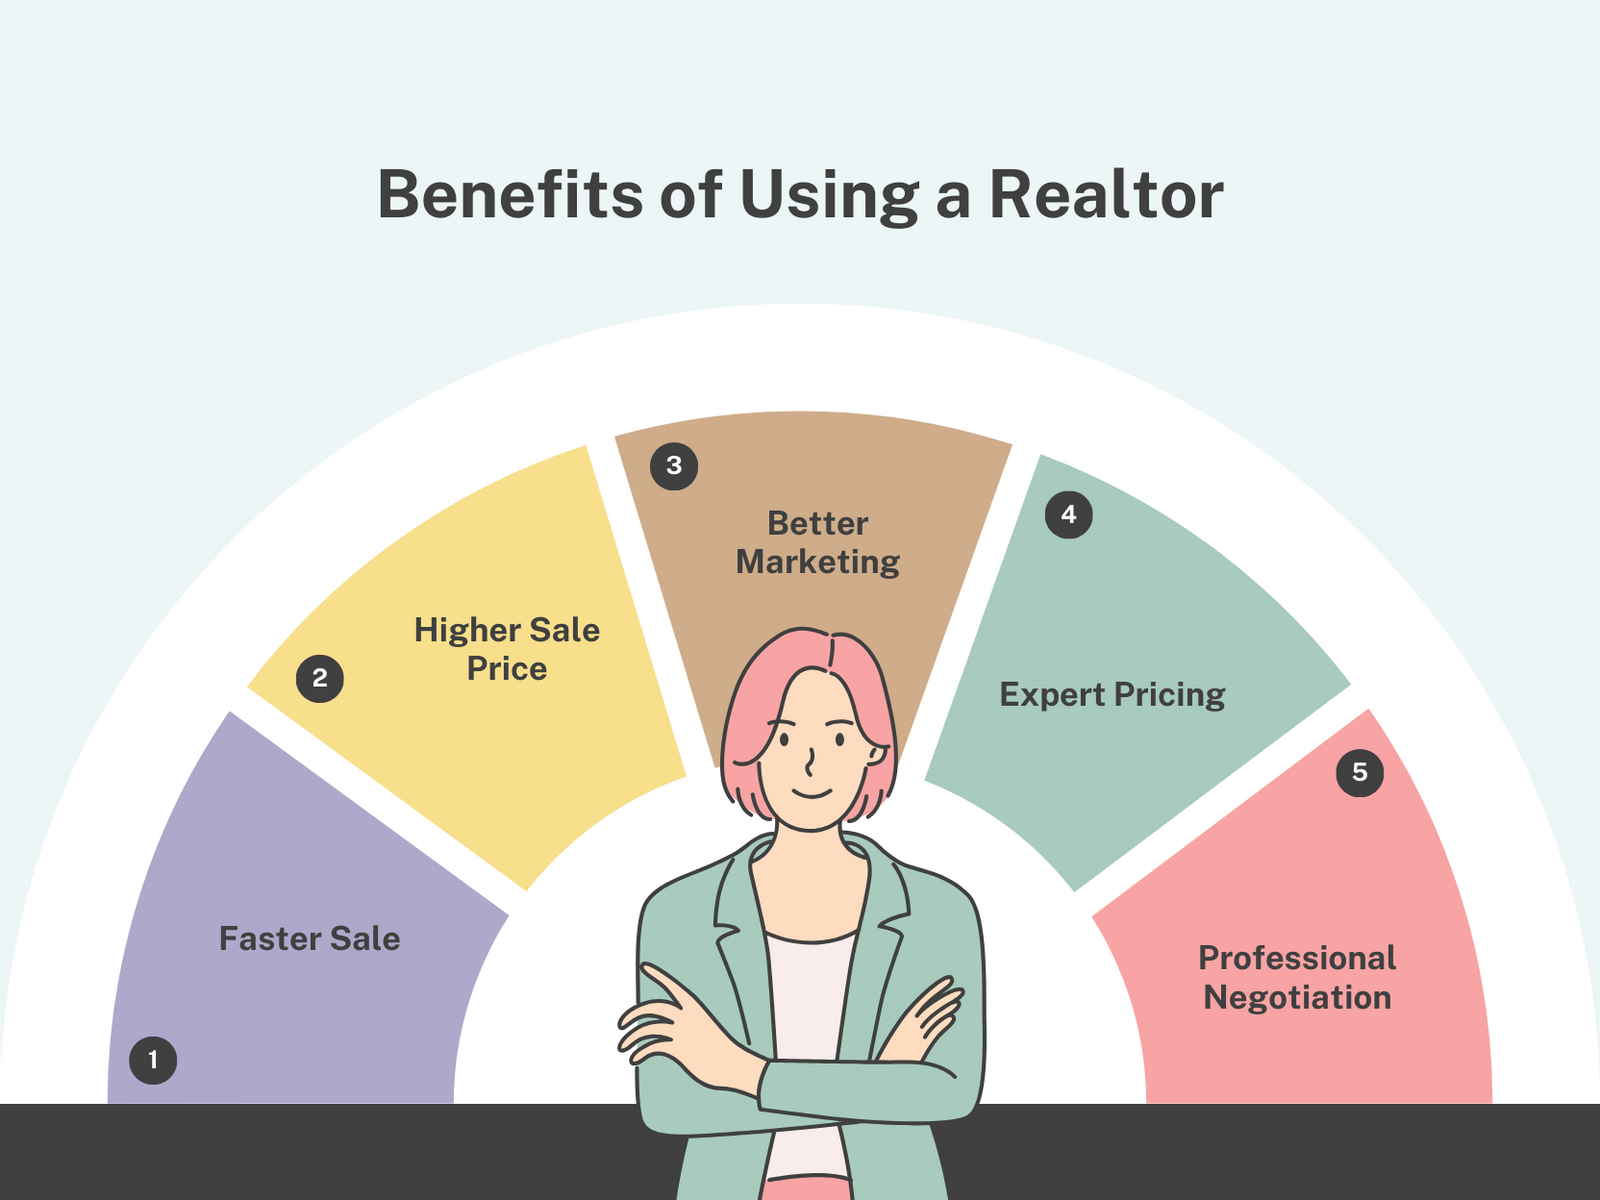 Infographic highlighting the benefits of hiring a realtor like Jennica George, including faster sales, higher prices, and better marketing. Key points: Realtor-represented homes sell 12 days faster and for 10% more, garner 2.5x more views, and generate 3.5x more inquiries. Professional pricing and negotiation ensure optimal sale conditions. Data from NAR, Zillow, Real Estate Webmasters, and the Real Estate Negotiation Institute, 2020.